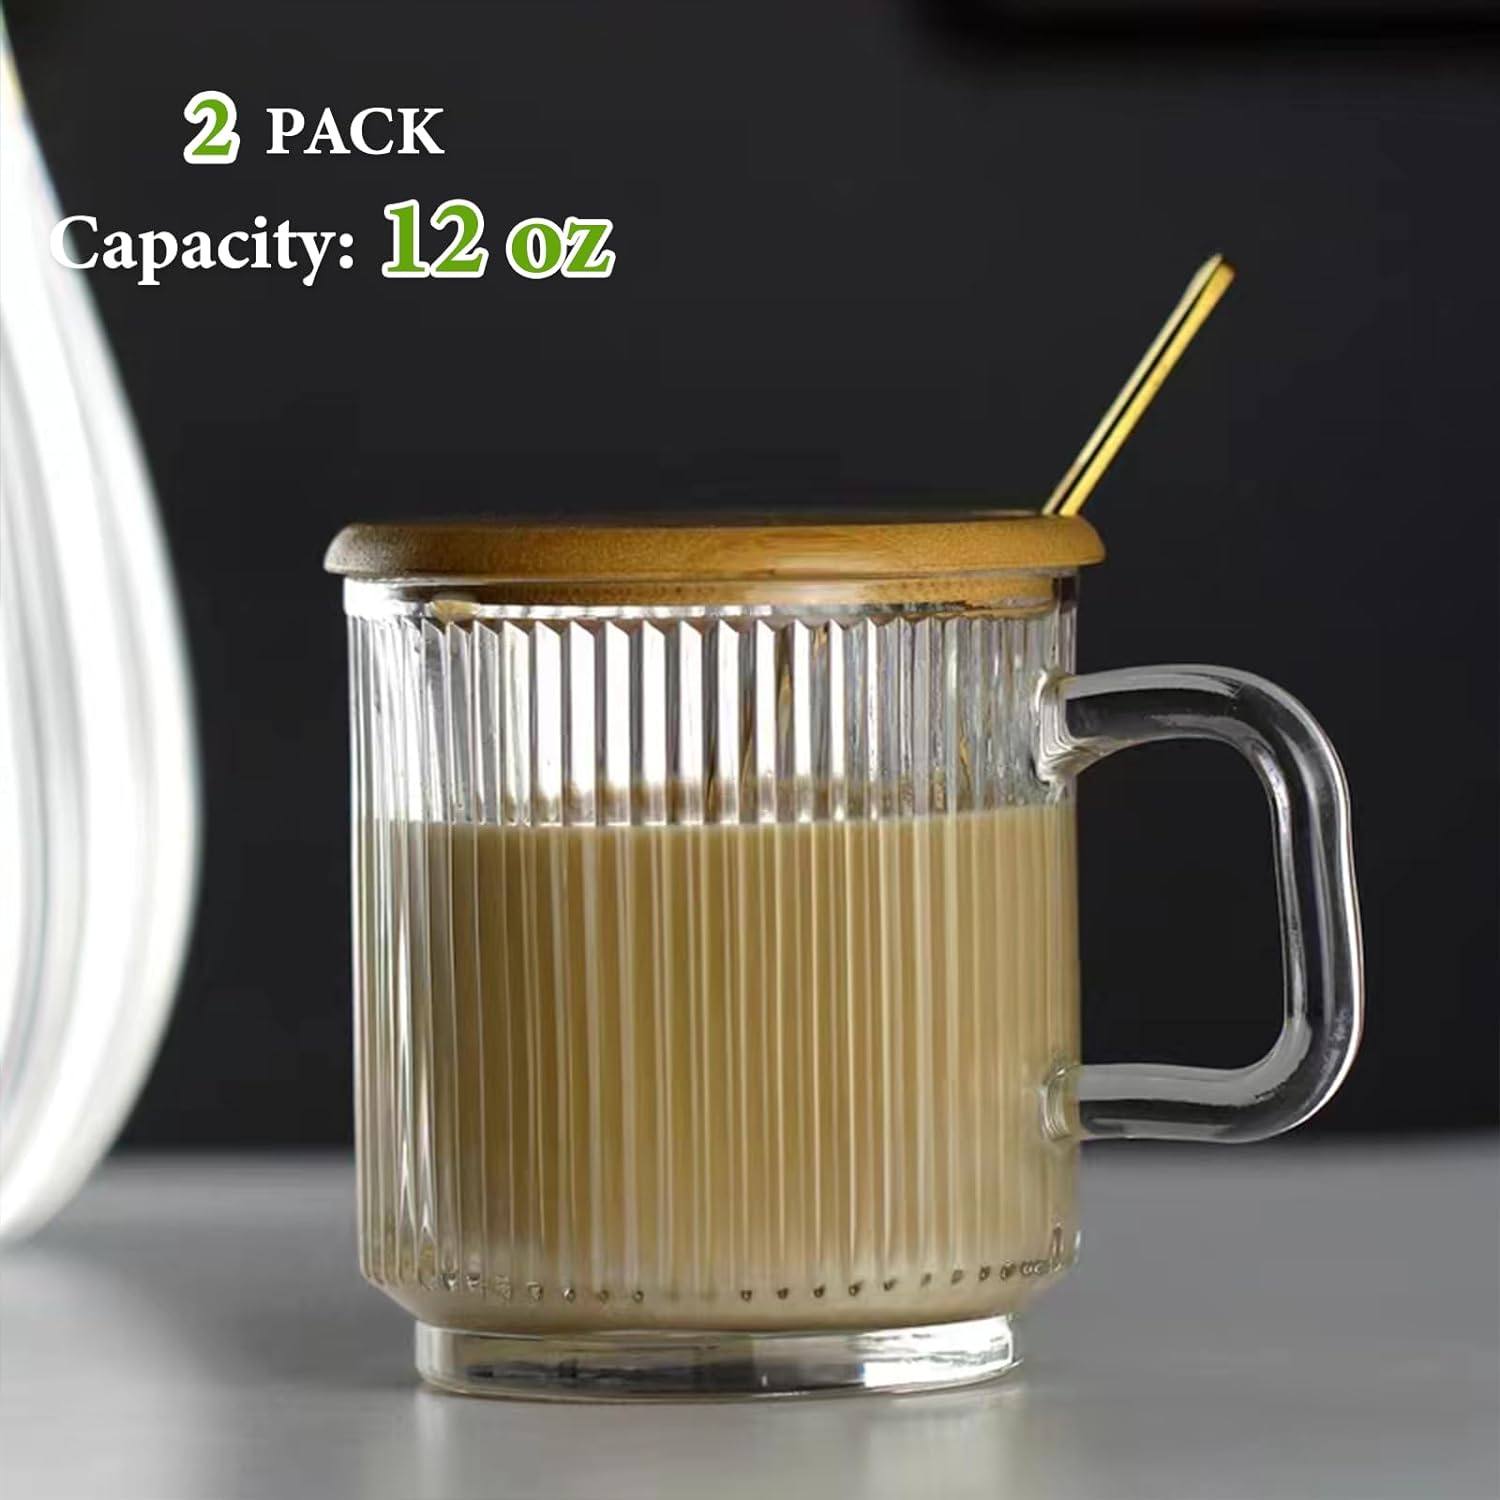 2 glass coffee cups with handle and spoon| 12oz